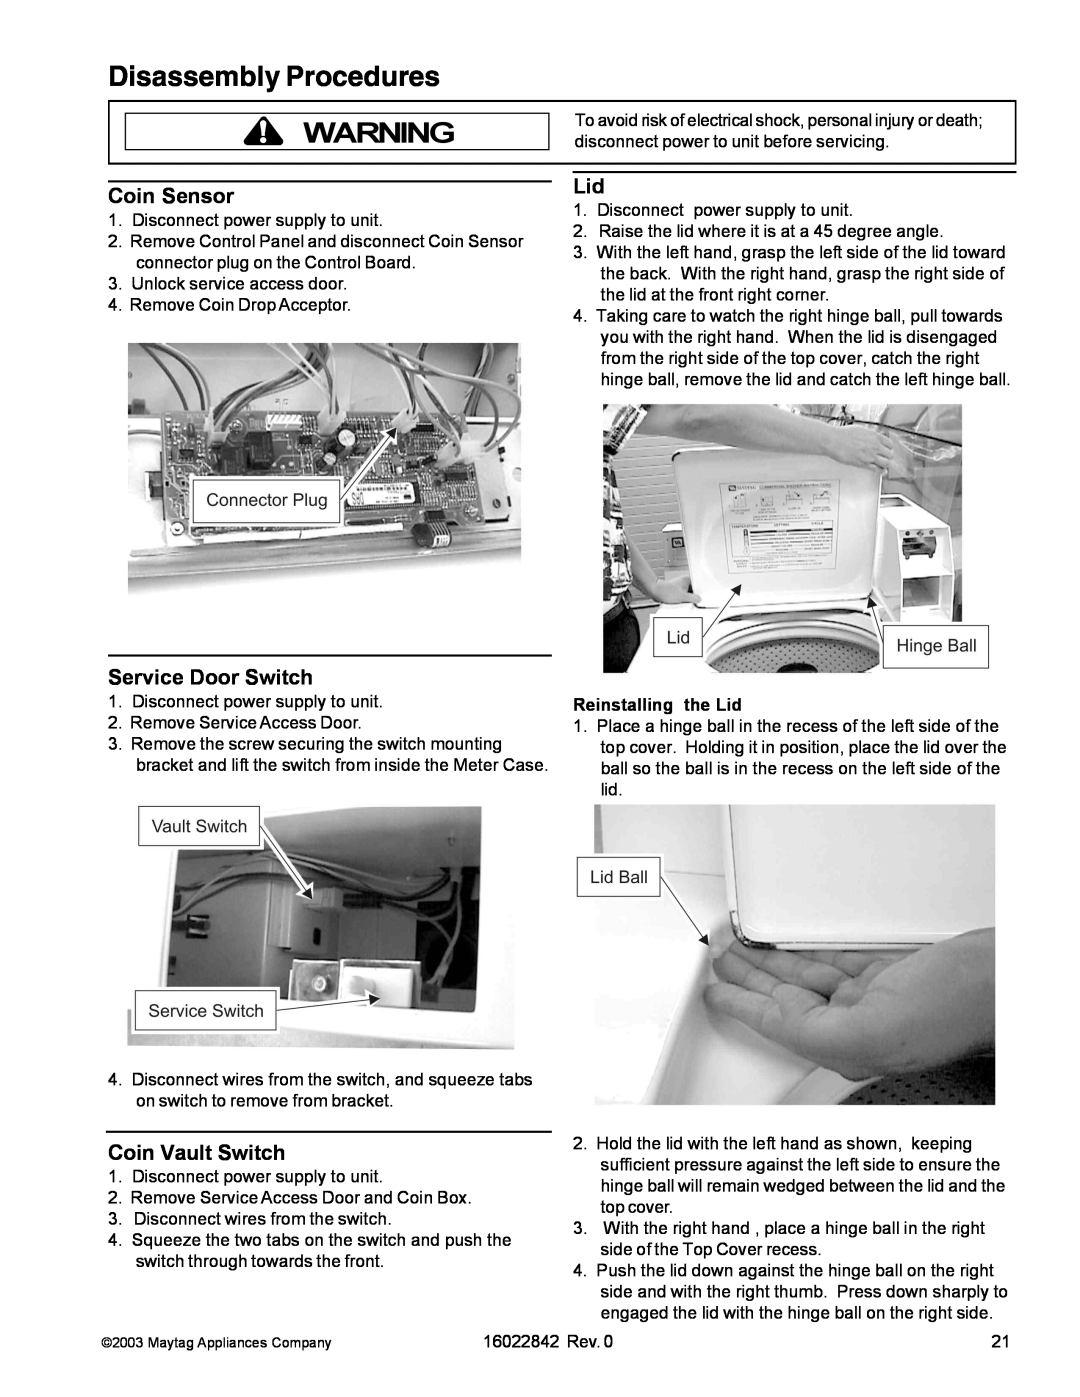 Maytag MAT12PDB manual Coin Sensor, Service Door Switch, Coin Vault Switch, Disassembly Procedures, Reinstalling the Lid 